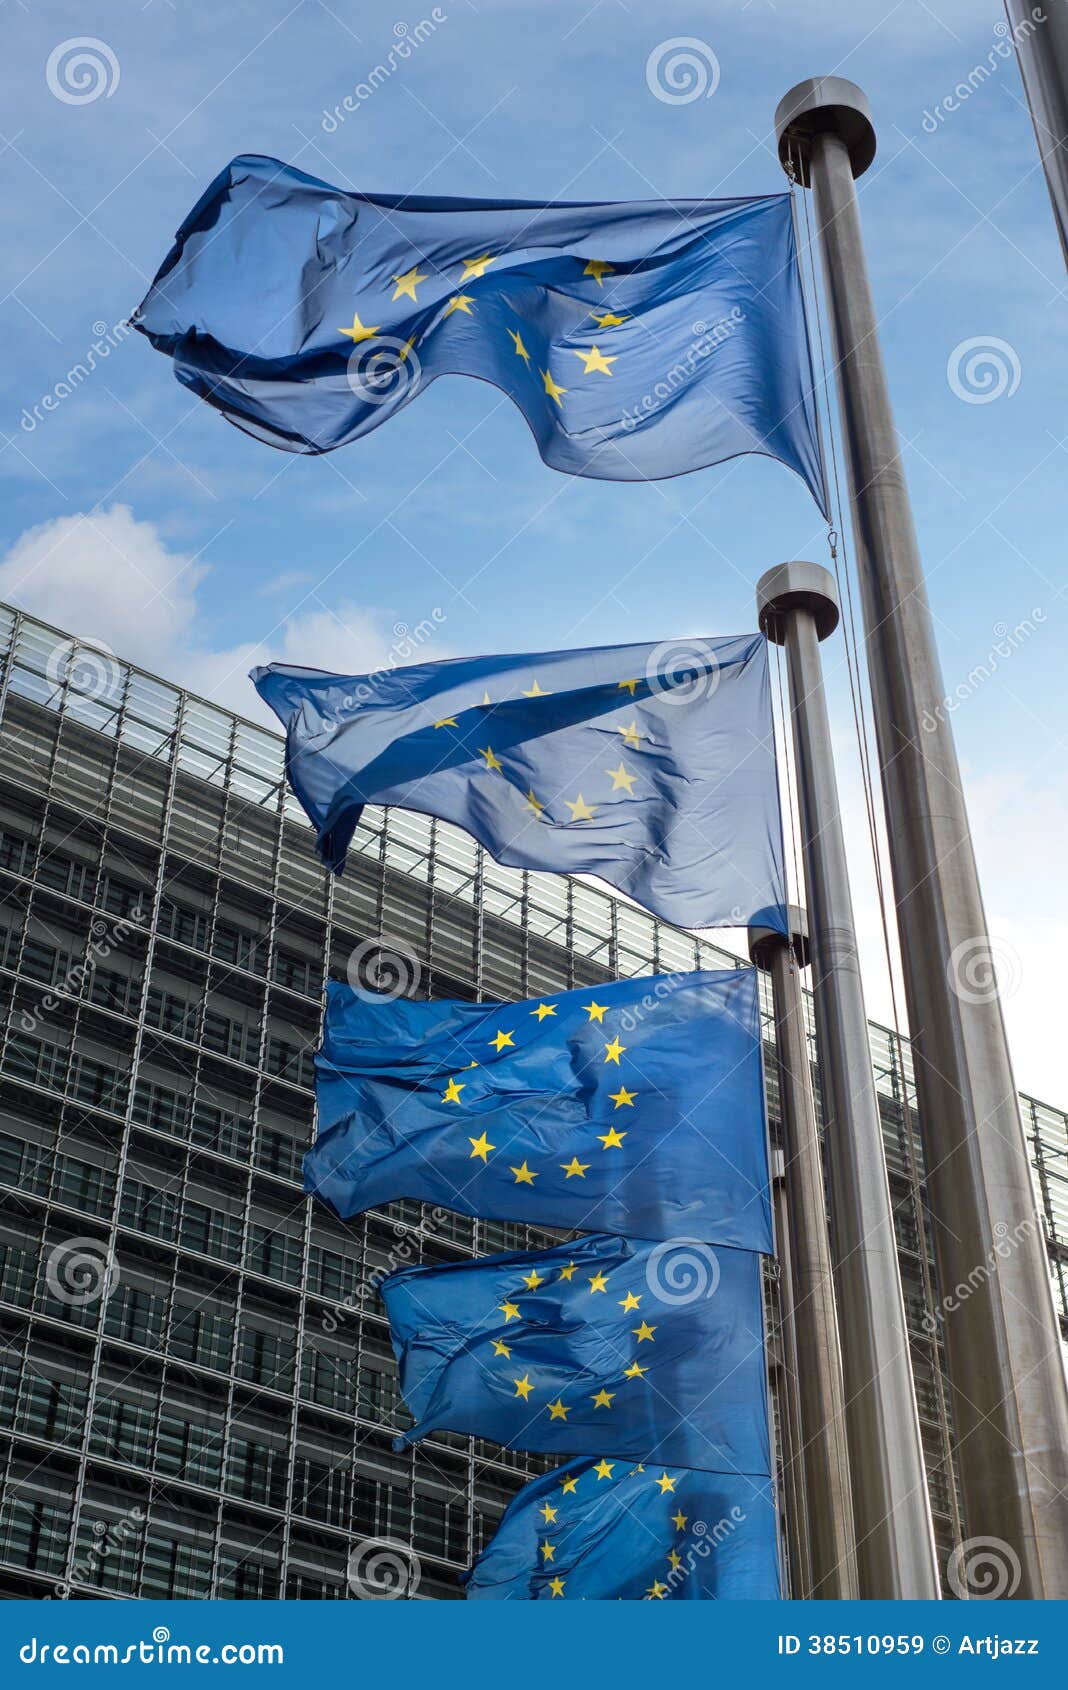 european union flags in front of the berlaymont building (european commission) in brussels, belgium.